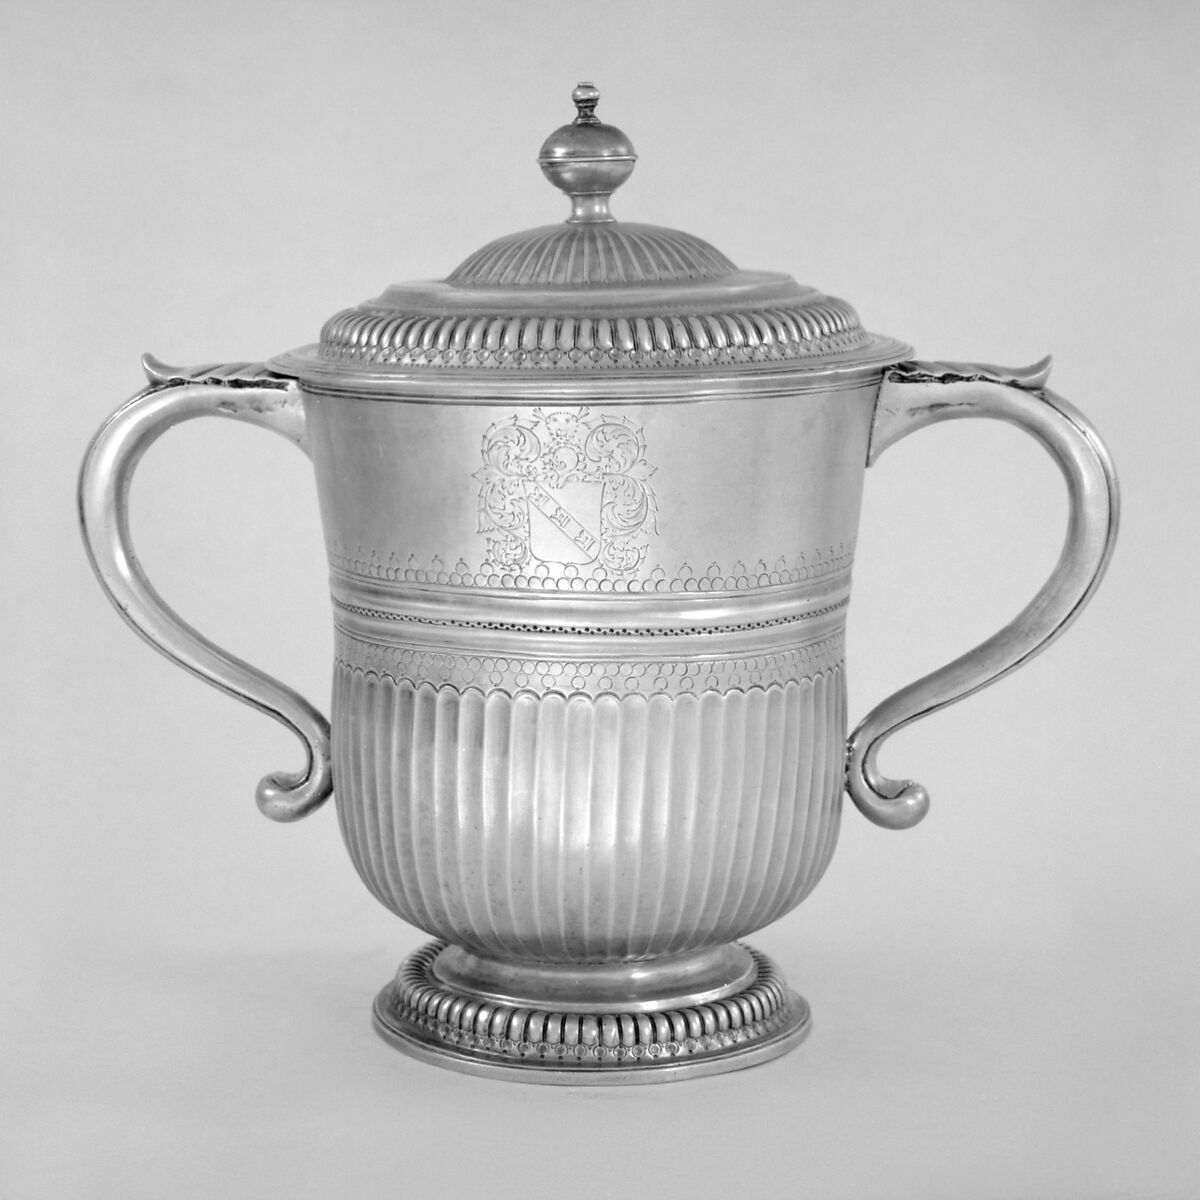 Two-handled cup with cover, Christopher Waggoner (active 1698–1702), Silver, Irish, Dublin 